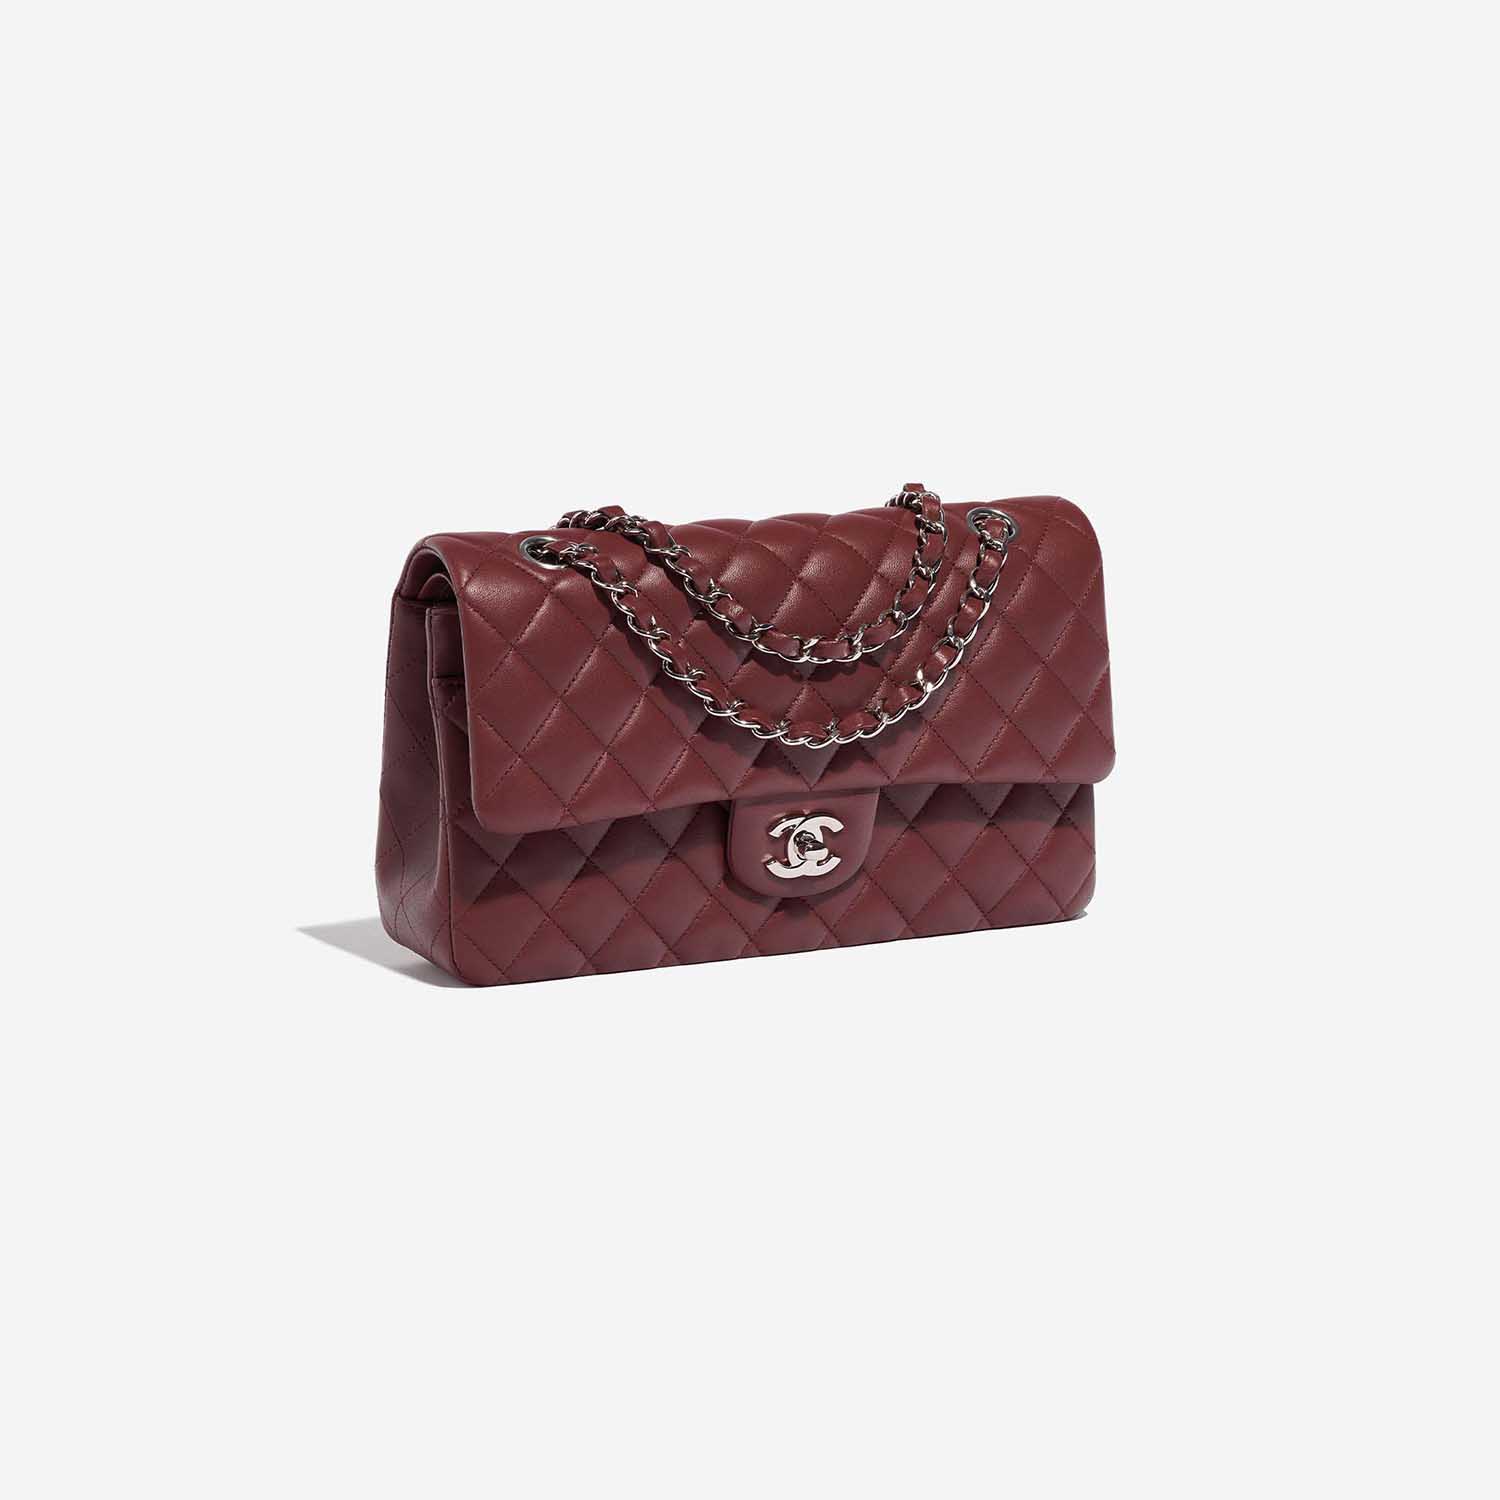 Chanel Dark Red Quilted Patent Leather Classic Square Mini Flap Bag   Yoogis Closet